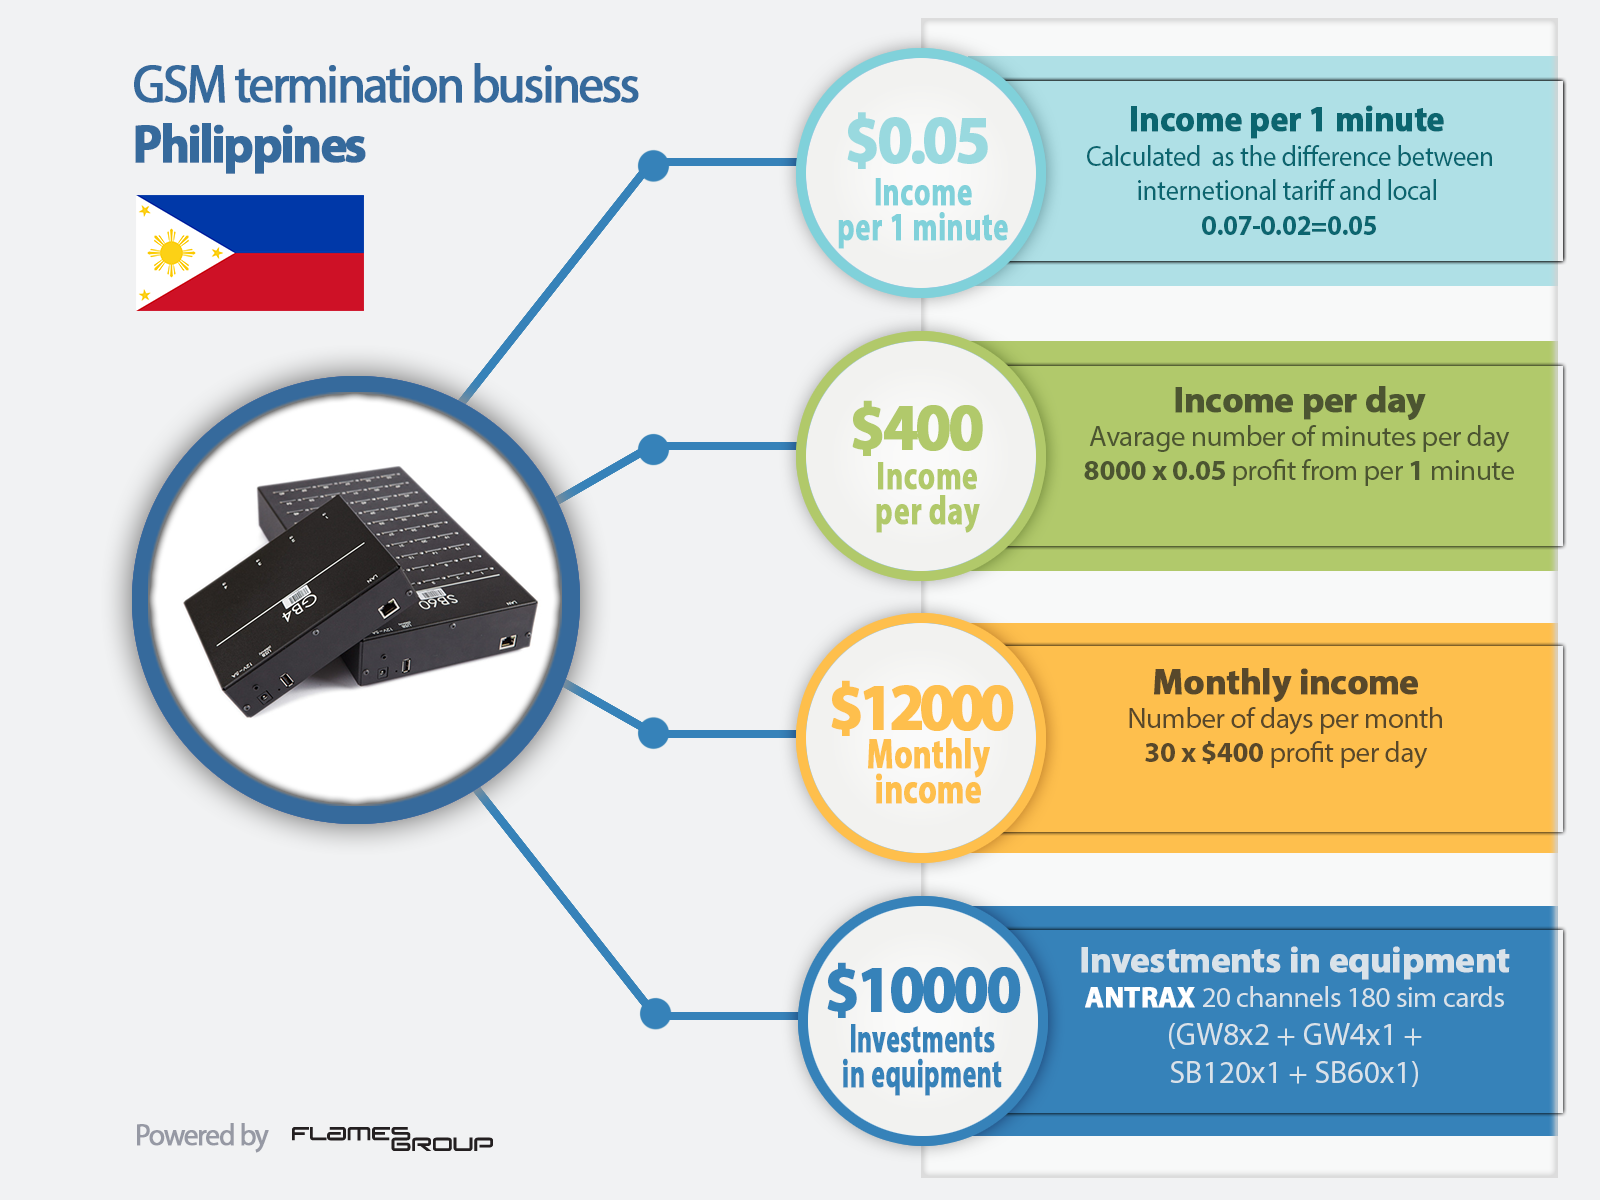 GSM termination in Philippines - Infographic ANTRAX